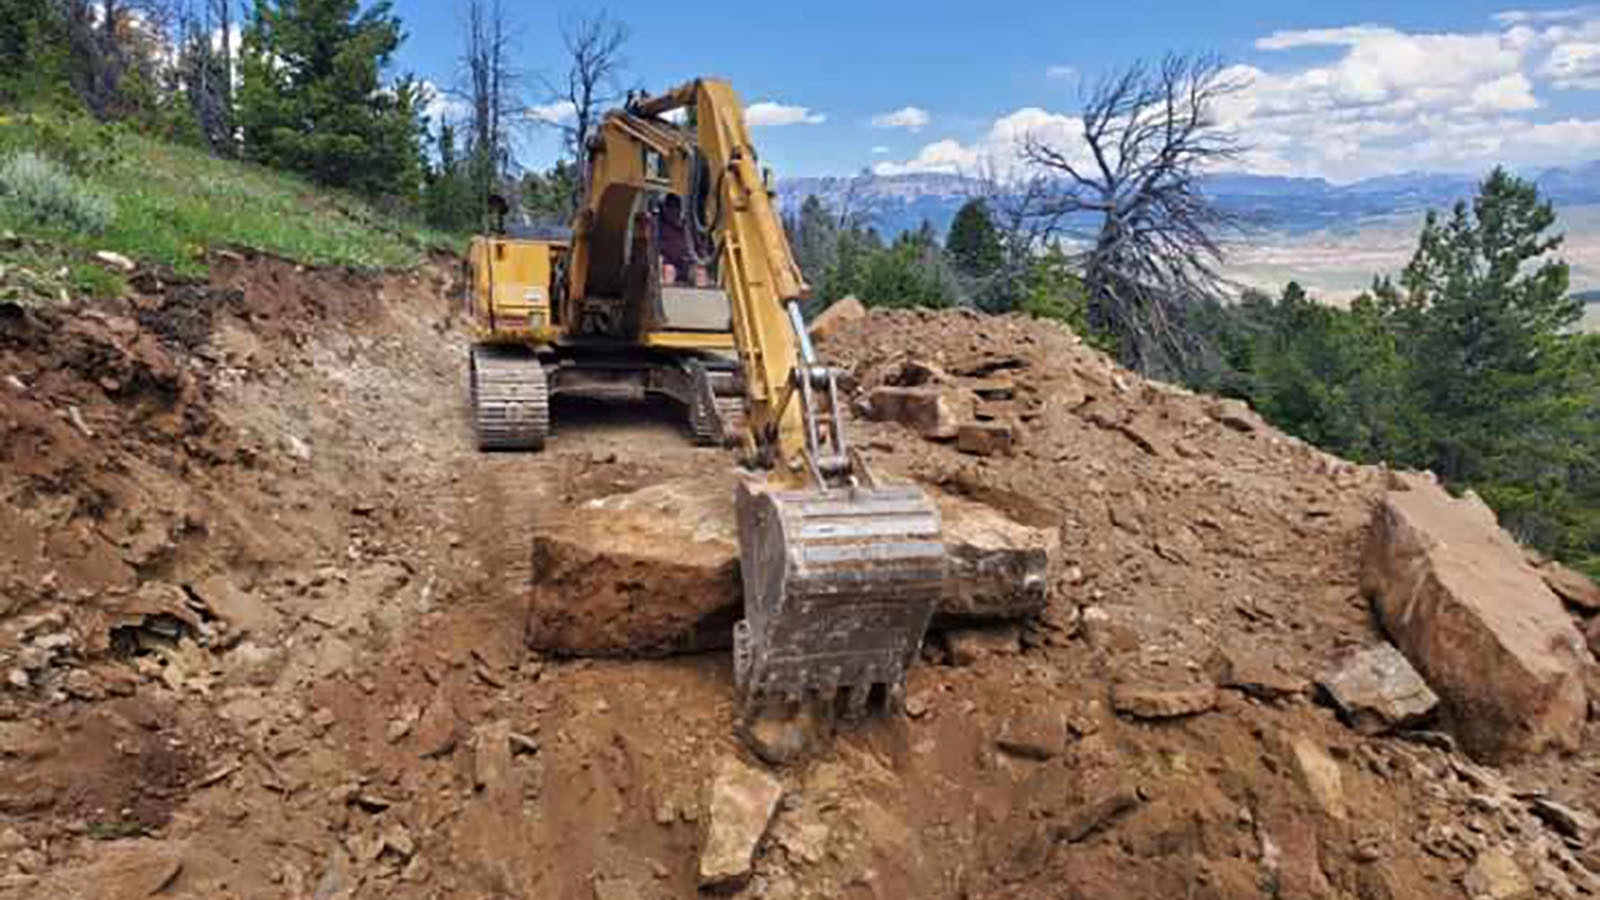 Septic tank installation underway at Cody Letteire’s off-grid mountain cabin near Dubois.